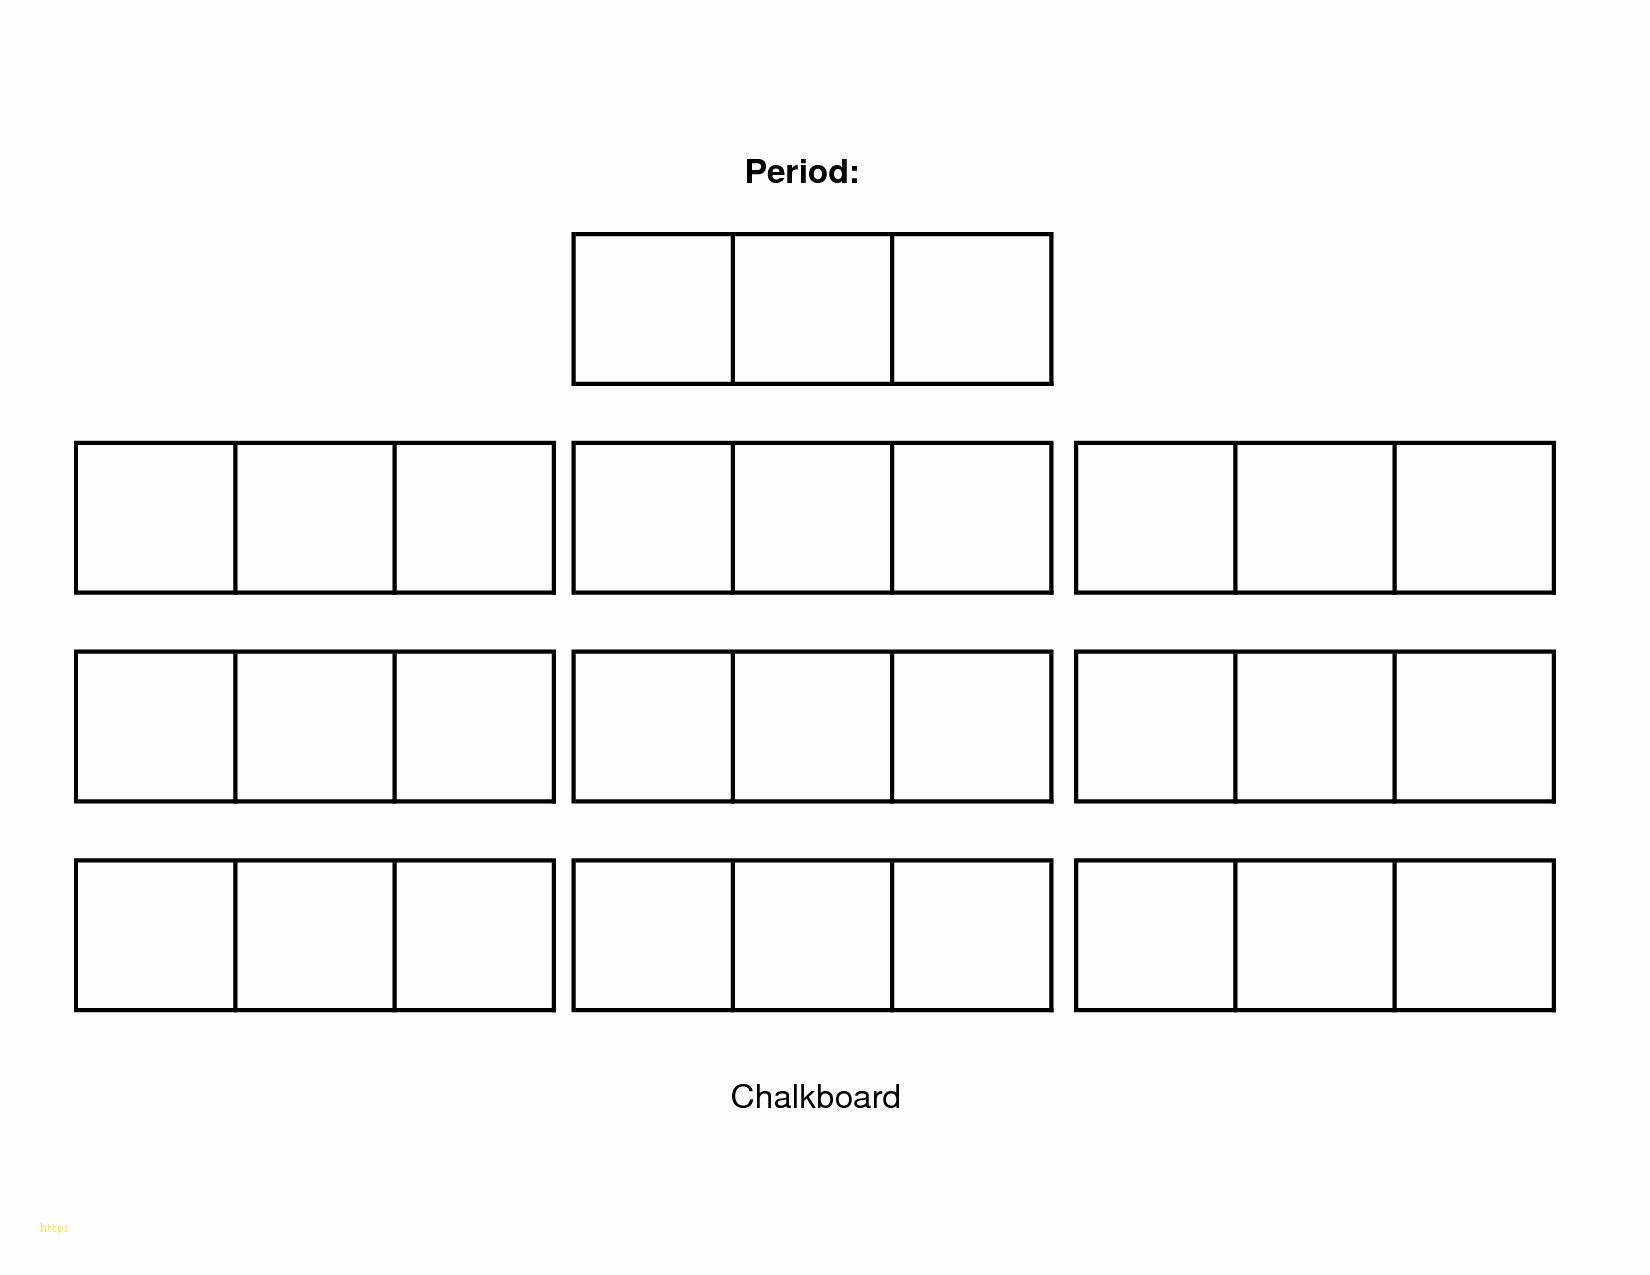 Seating Charts Templates for Classrooms Elegant Classroom Seating Chart Template Excel